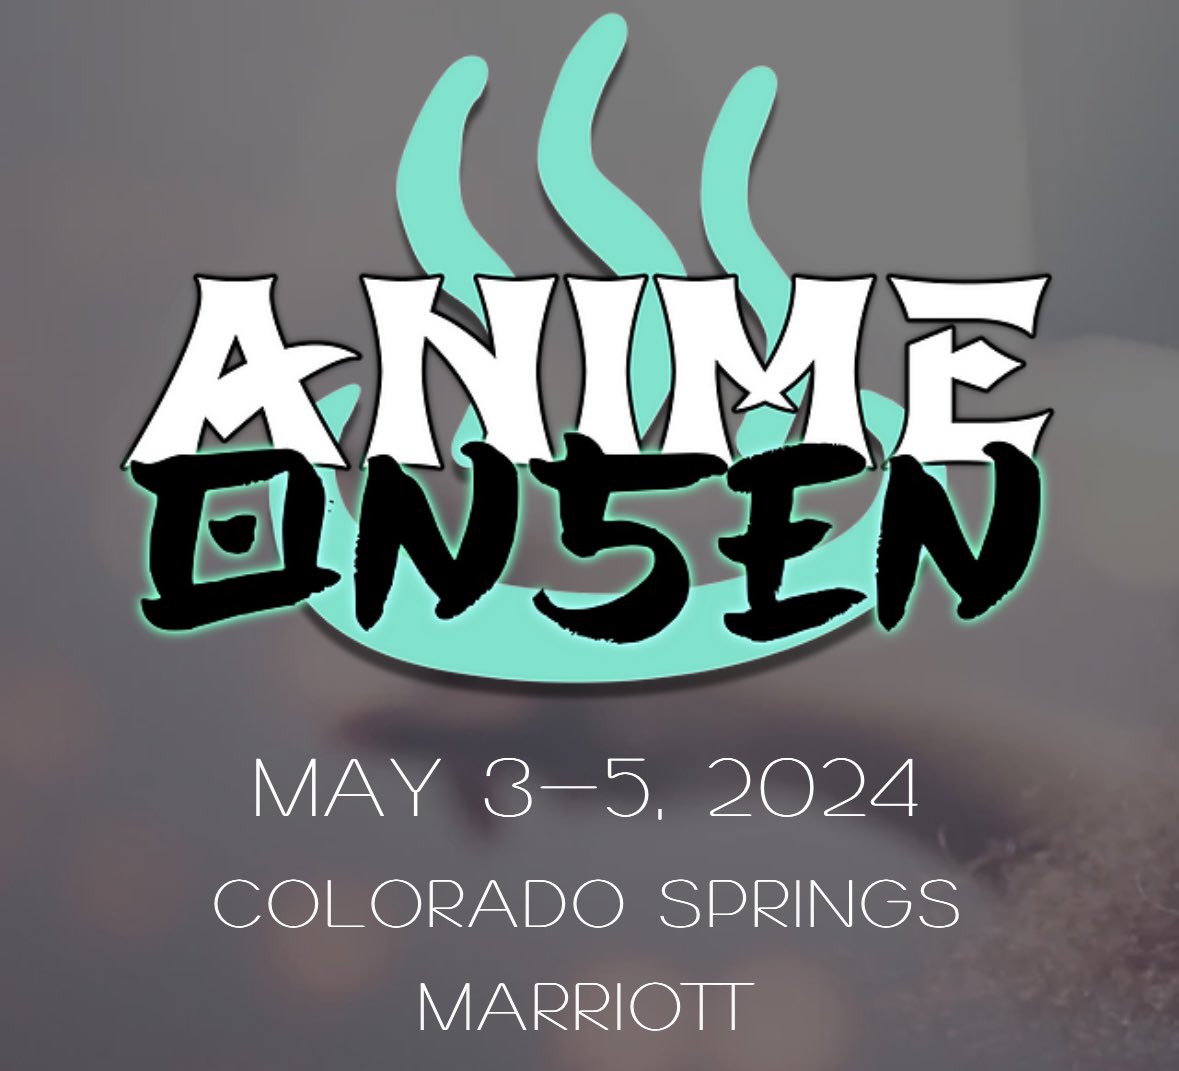 COLORADO, HERE I COME! This Fri-Sun, May 3-5, I'll be at ANIME ONSEN at the COLO. SPRINGS MARRIOTT. Come out for a great weekend of fun, friends & fans - & don't forget those Whitebeard & Captain Ginyu Funko Pops - SEE YOU THERE! #AnimeOnsen #ConventionsEtc #Whitebeard #Ginyu #